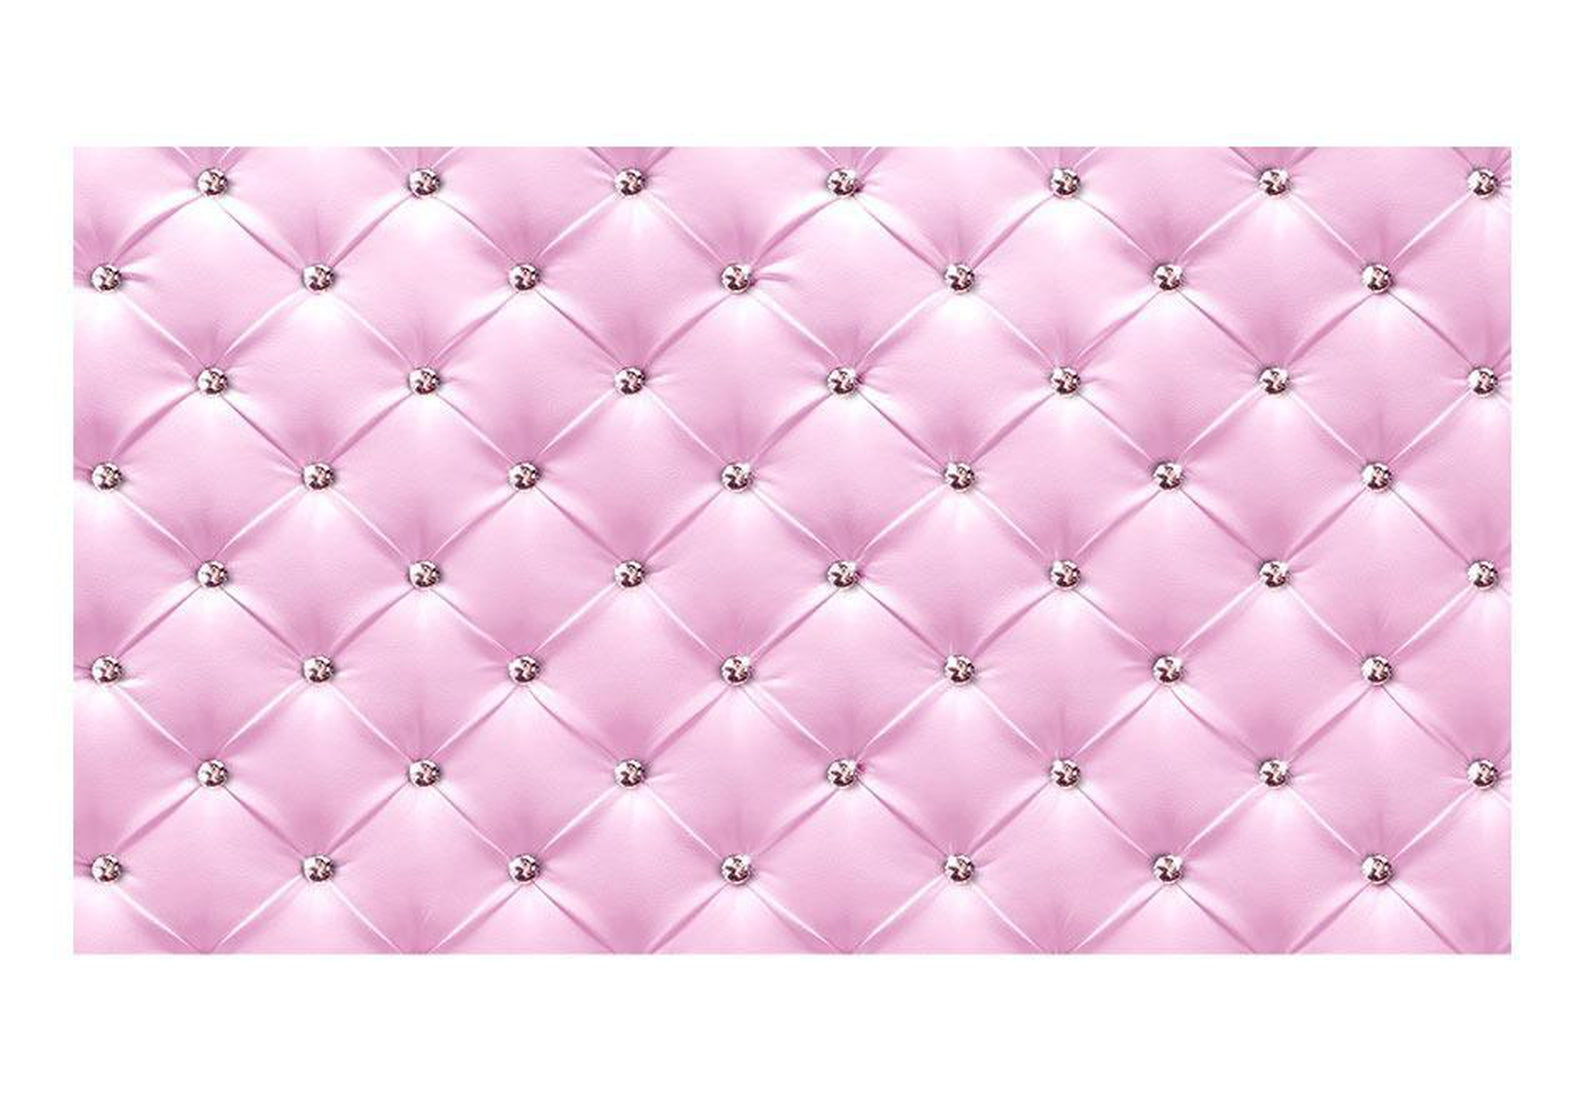 Peel & Stick Wall Mural - Pink Chesterfield And Diamonds - Removable Wall Decals